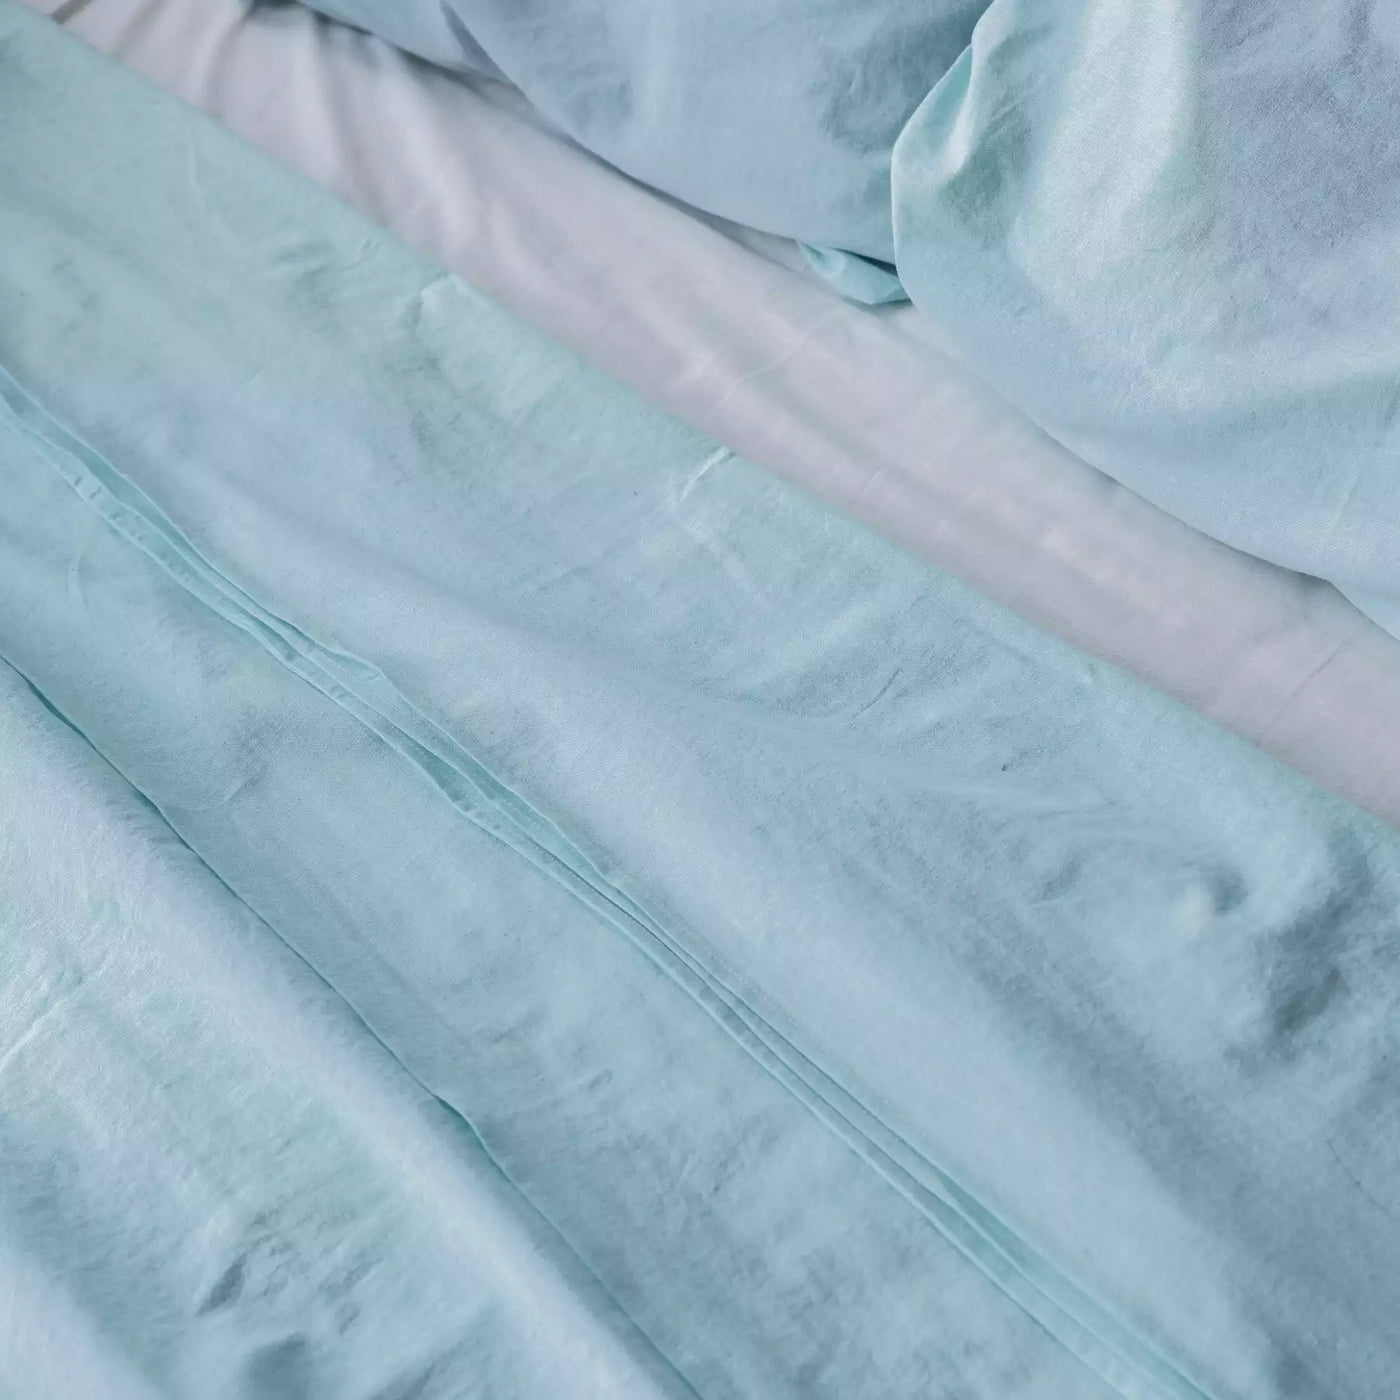 Linen & Cotton Bedding set with Flat sheet 190x270 in Turquoise Melange